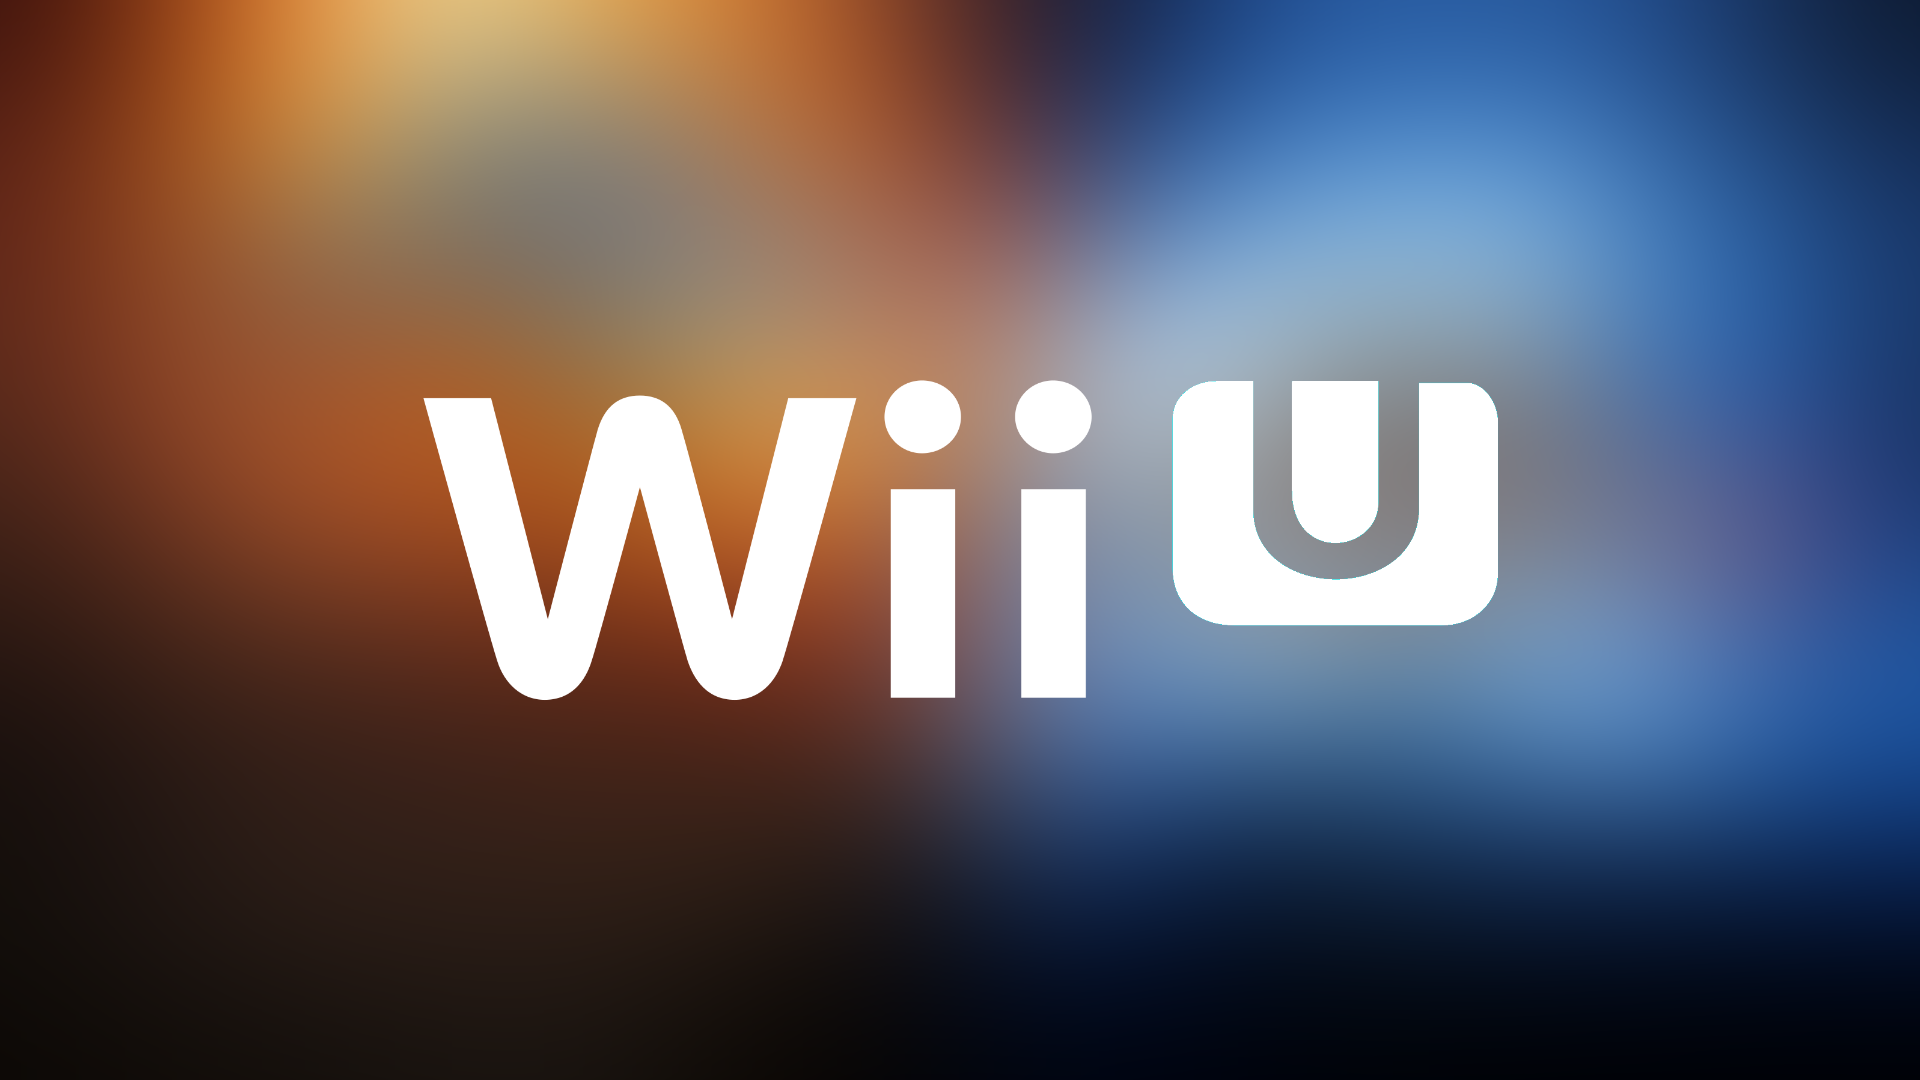 Wii Backgrounds